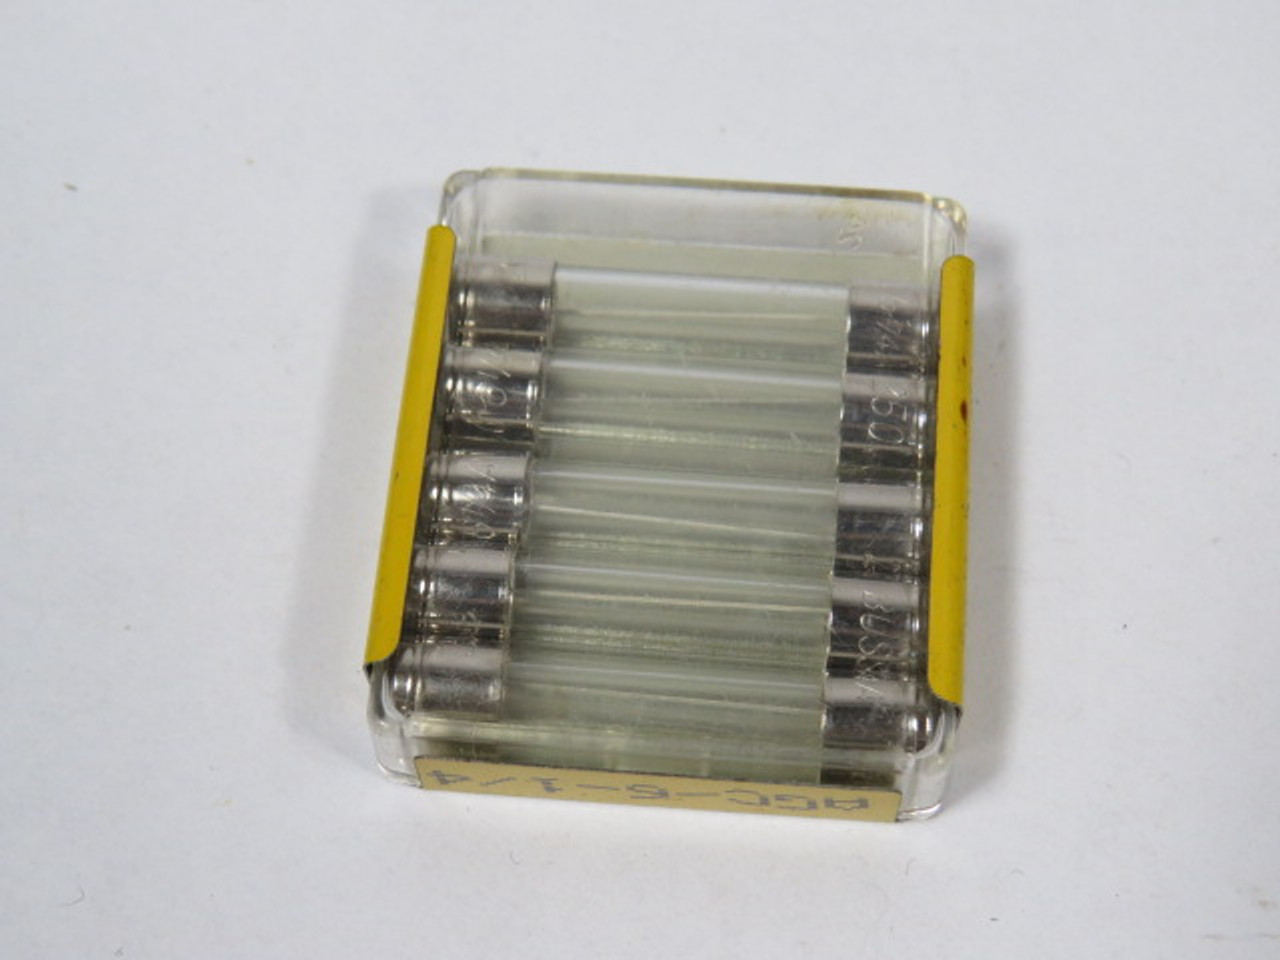 Bussmann AGC-6-1/4 Fast-Acting Glass Fuse 6-1/4A 250V 5-Pack ! NEW !